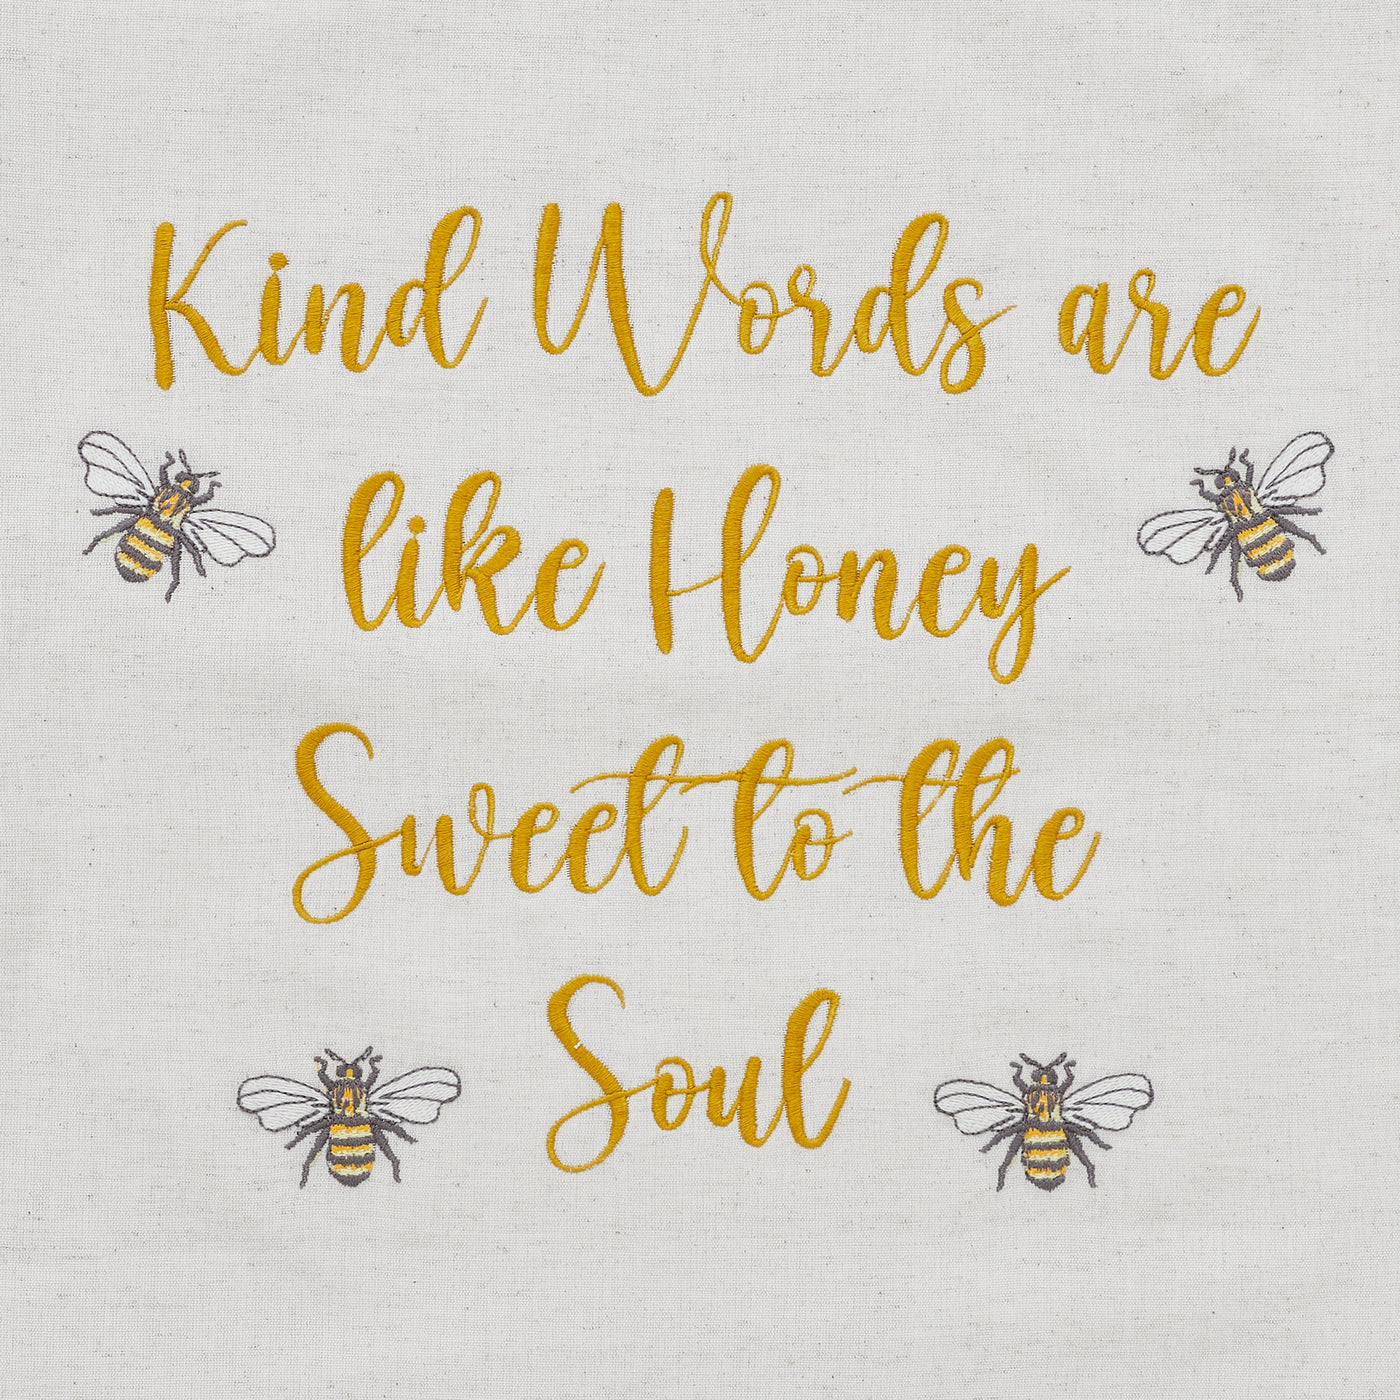 😊 WARM + COZY DAY 14 ✨ Kind Words Are Like Honey Bee Accent Pillow 18"